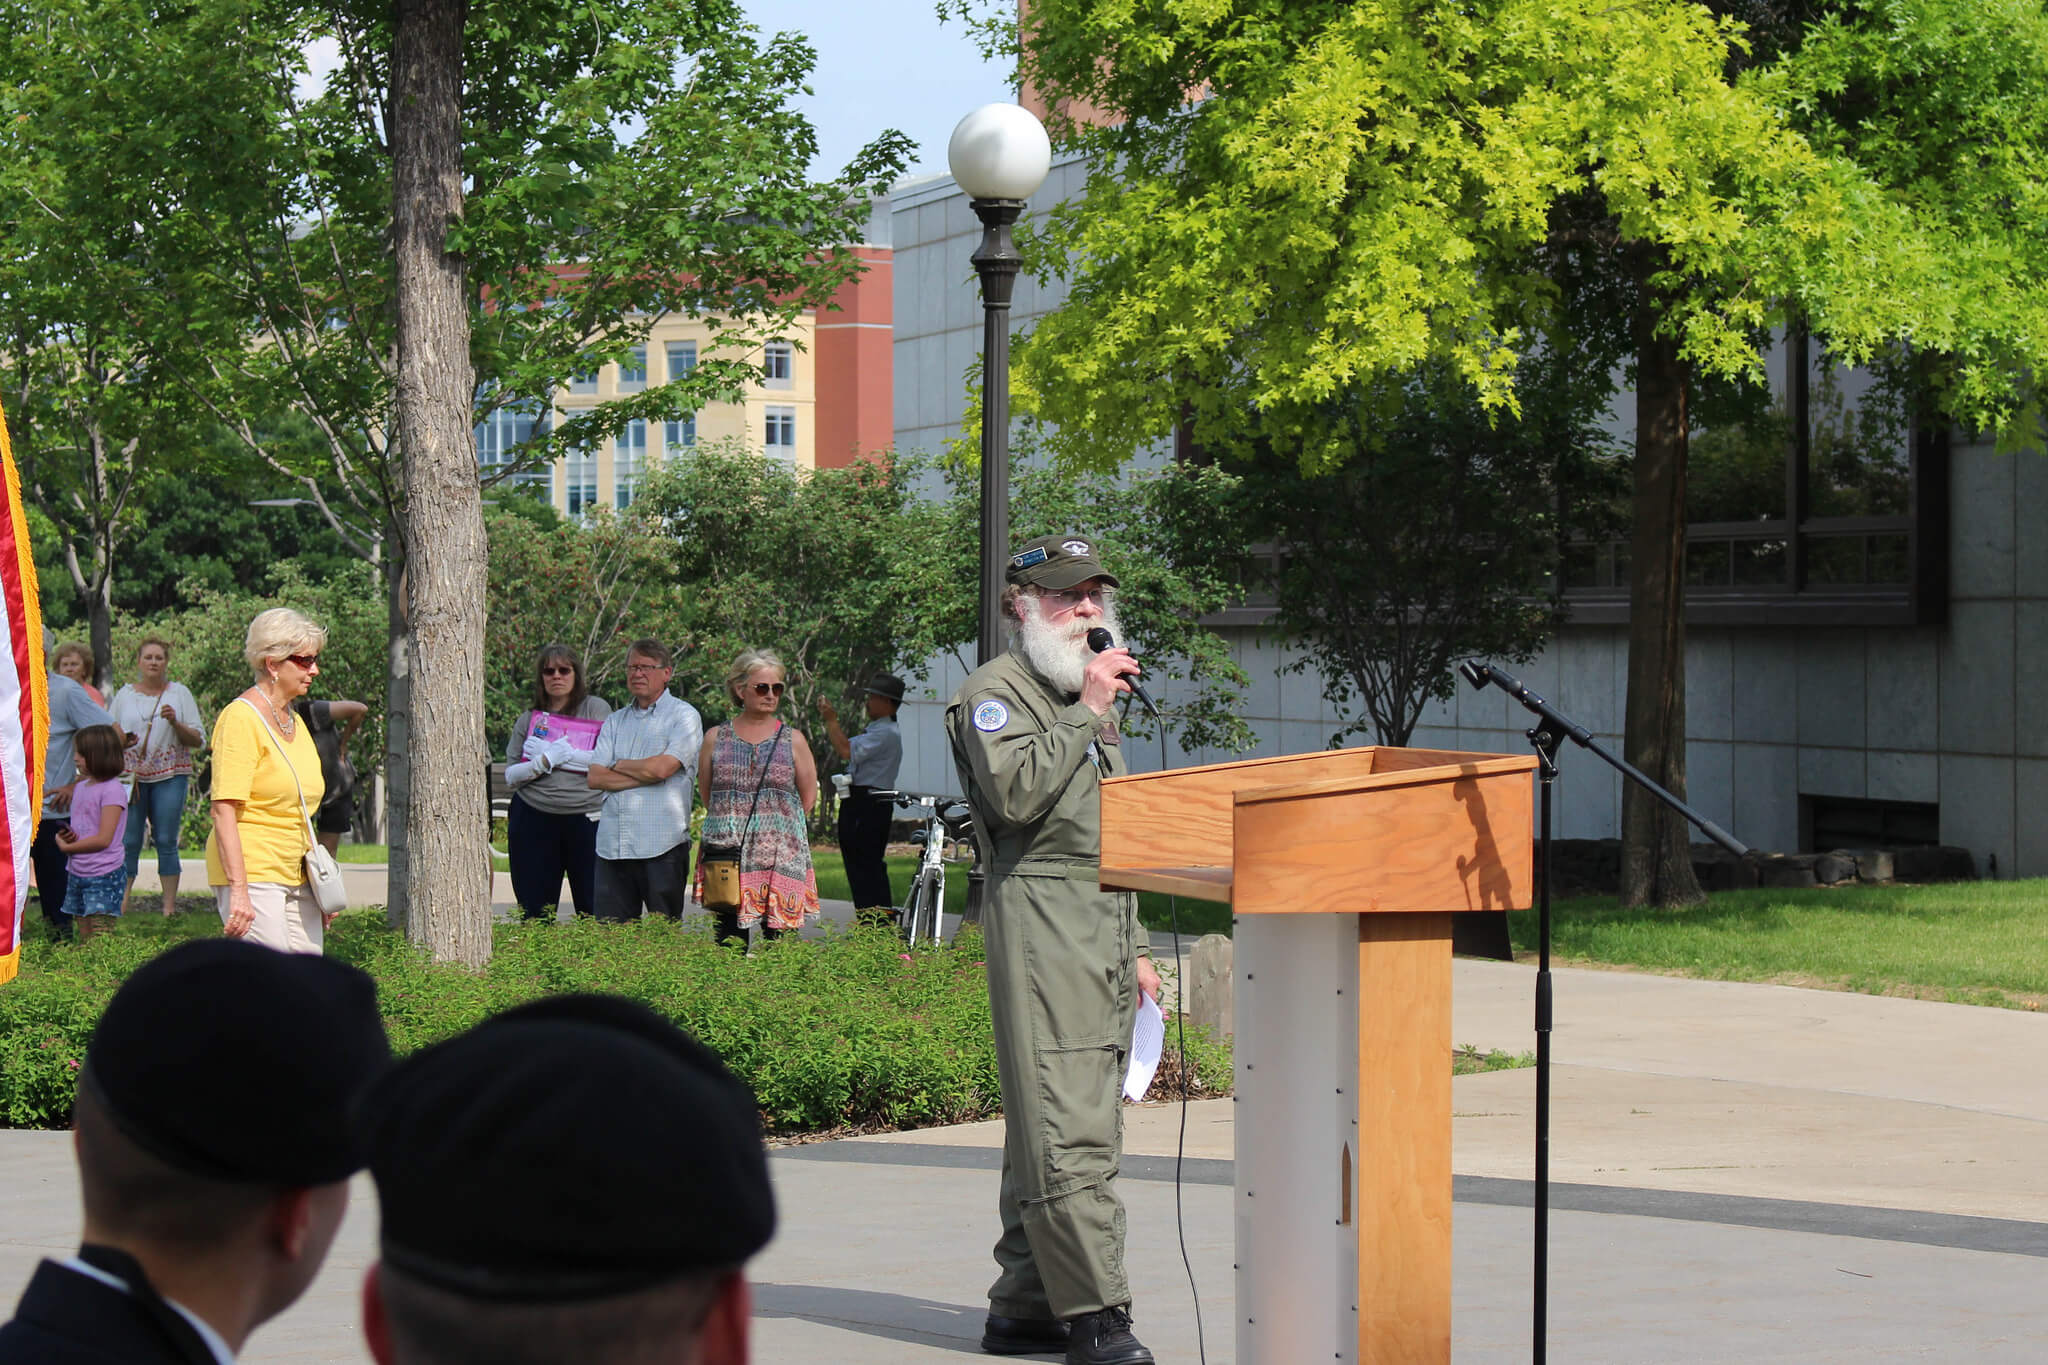 Man in flight suit talks into a microphone at a public outdoor event.